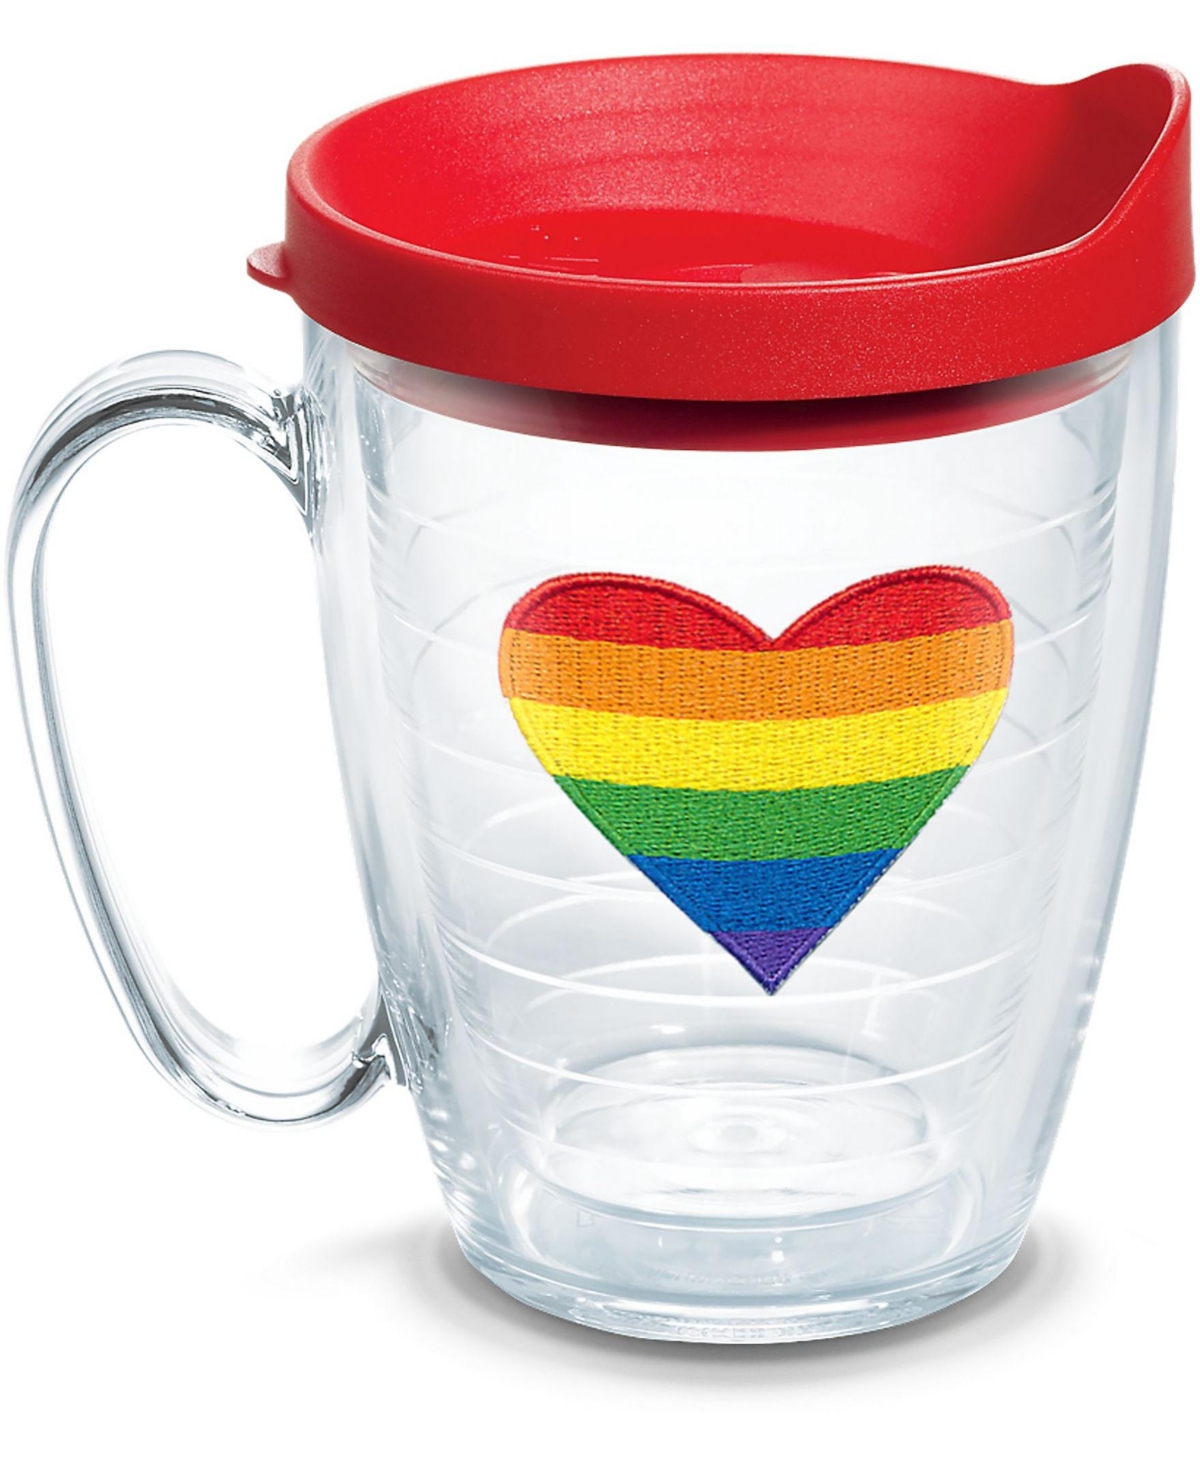 Tervis Tumbler Tervis Pride Heart Made In Usa Double Walled Insulated Tumbler Travel Cup Keeps Drinks Cold & Hot, 1 In Open Miscellaneous